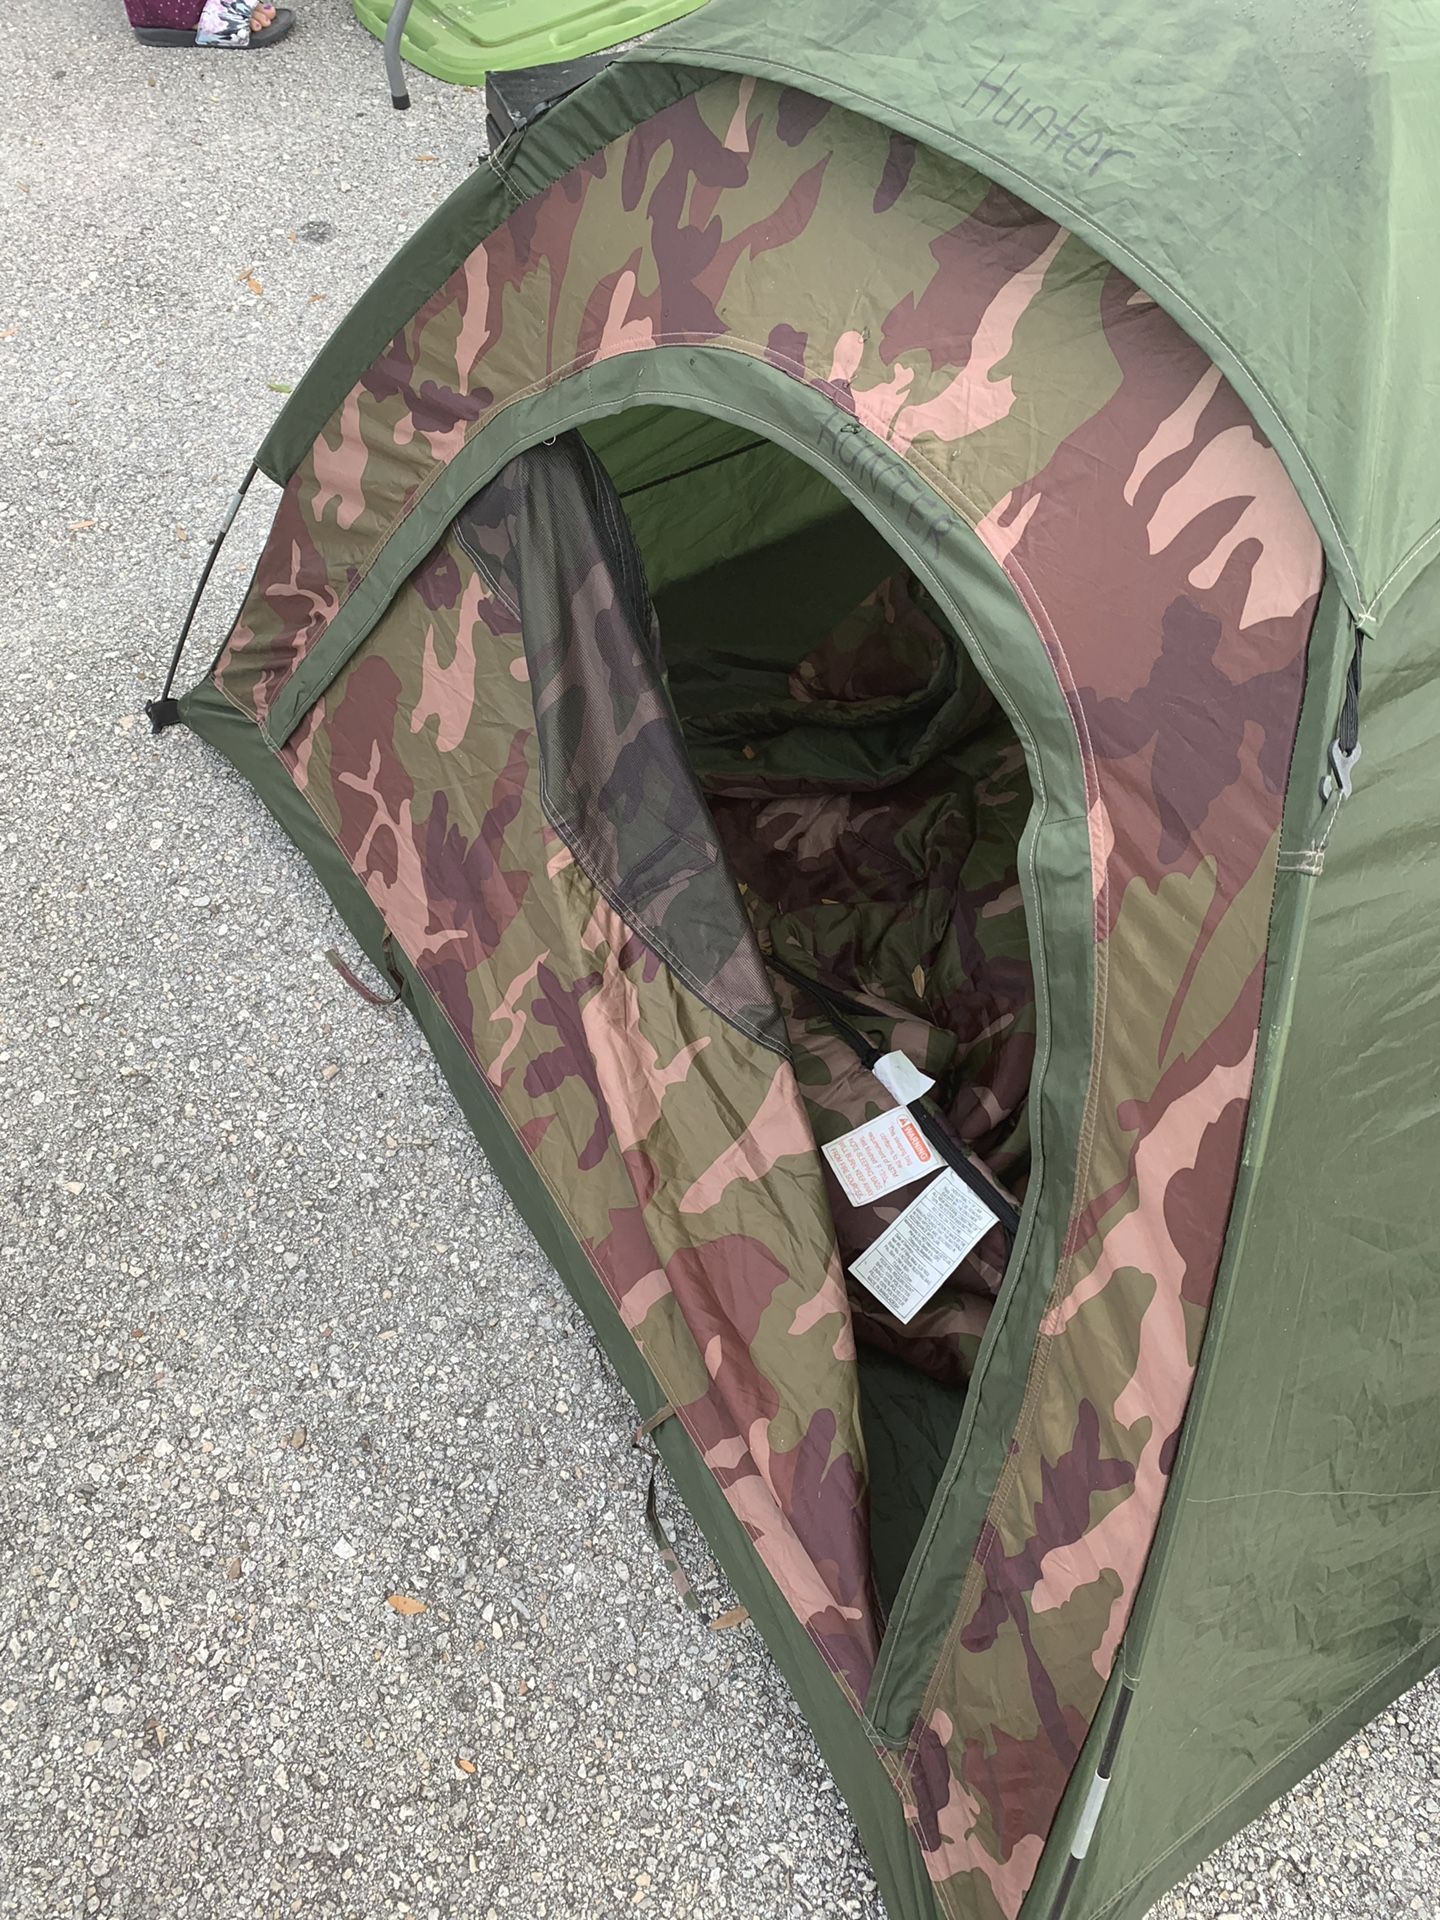 Tent with matching sleeping bag